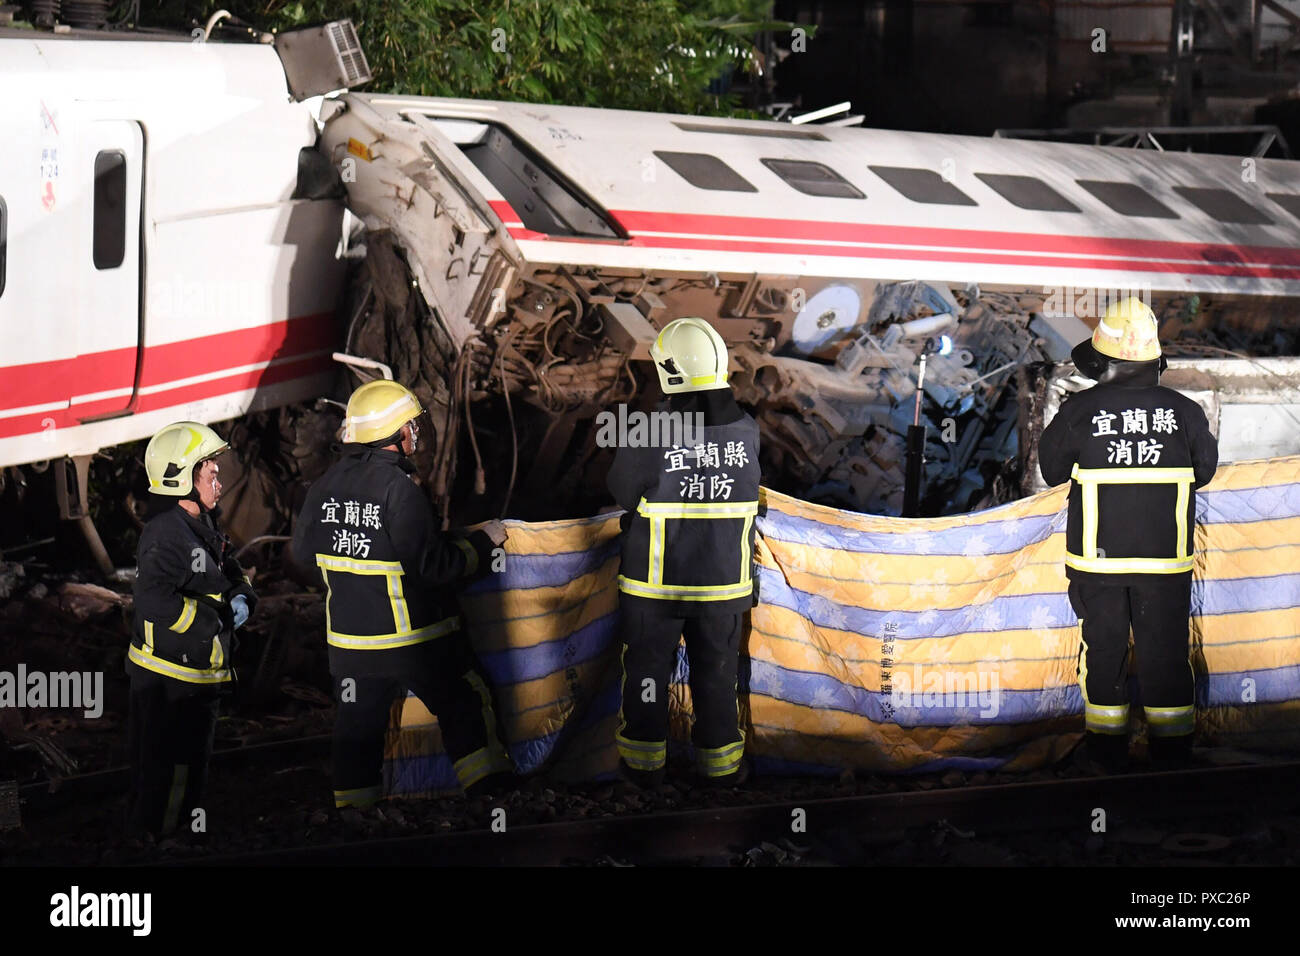 Yilan, China. 21st Oct, 2018. shows the rescuing site of the train derailment accident in Yilan County, southeast China's Taiwan. At least 17 people died and another 120 injured as of 7 p.m. Sunday local time, after a passenger train derailed in Taiwan on Sunday afternoon, according to the island's railway authority. The Puyuma Express No. 6432 bound for Taitung from Shulin Station with 366 passengers on board derailed at 4:50 p.m. local time at Su'aoxin Station in Yilan County. Credit: Xinhua/Alamy Live News Stock Photo